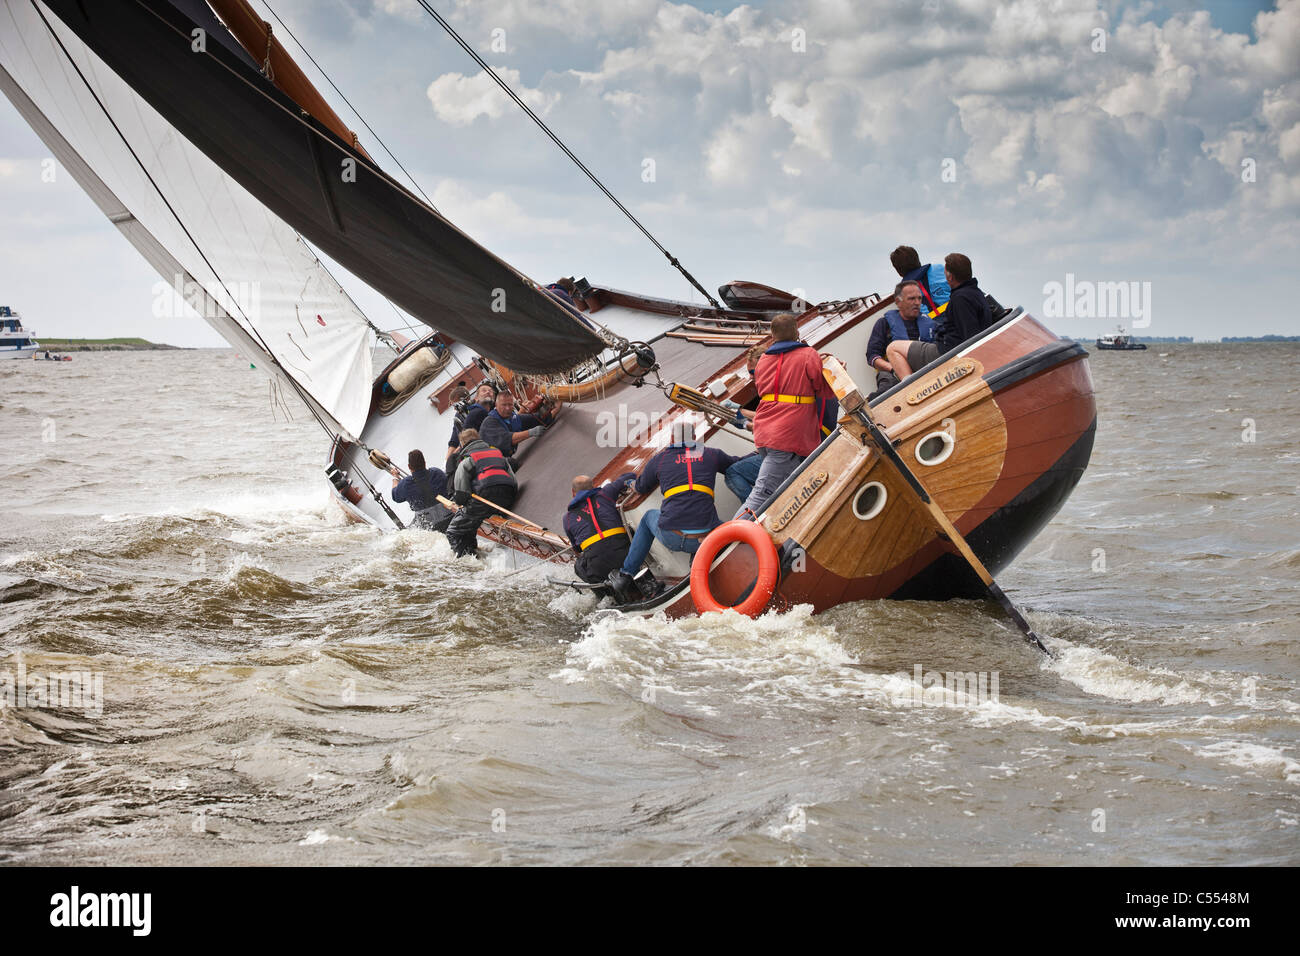 The Netherlands, Lemmer, Sailing races called Skutsjesilen, with traditional flat-bottomed cargo boats called Skutsjes. Stock Photo